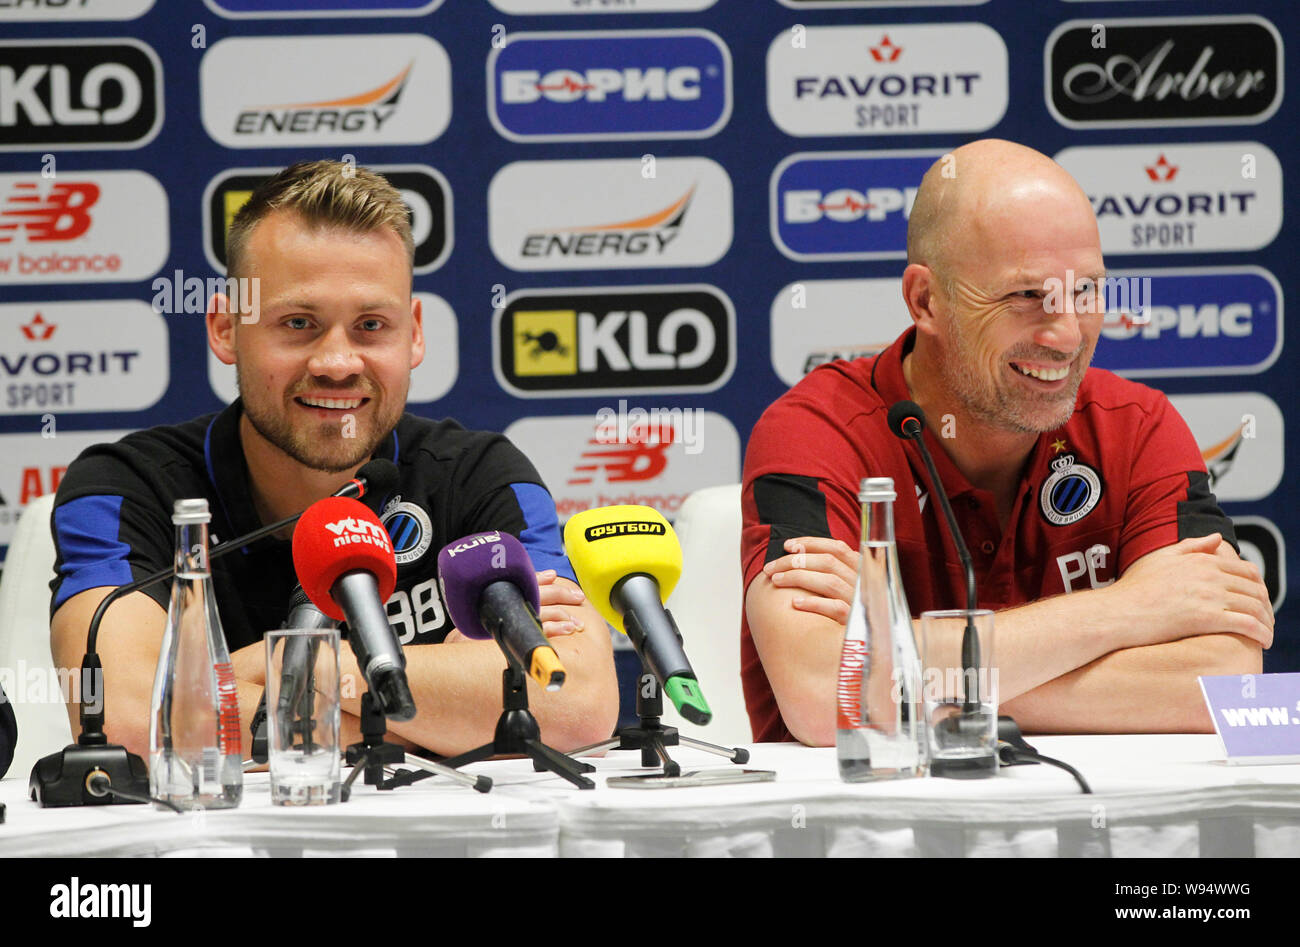 Brugge's Belgium head coach Philippe Clement (R) and goalkeeper Simon Mignolet (L) attend a press conference at the NSC Olimpiyskiy stadium in Kiev.Club Brugge will face Dynamo Kyiv on the UEFA Champions League third qualifying round second leg football match at the NSC Olimpiyskiy stadium in Kiev 13 August. Stock Photo